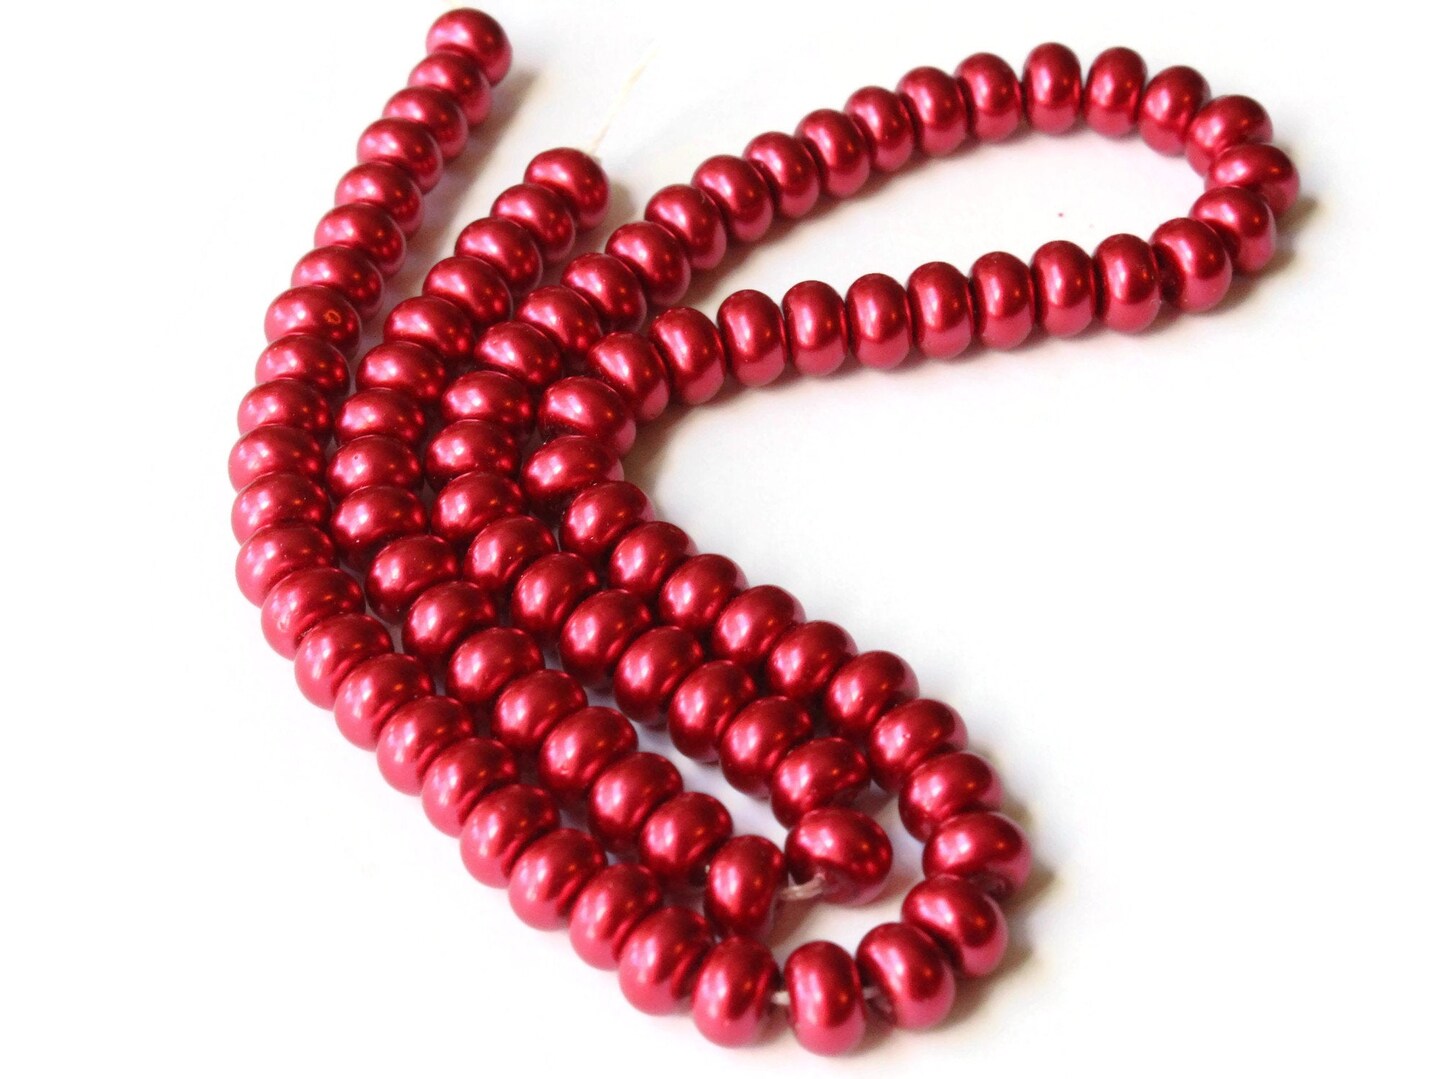 90 6mm Red Rondelle Glass Pearl Beads by Smileyboy Beads | Michaels